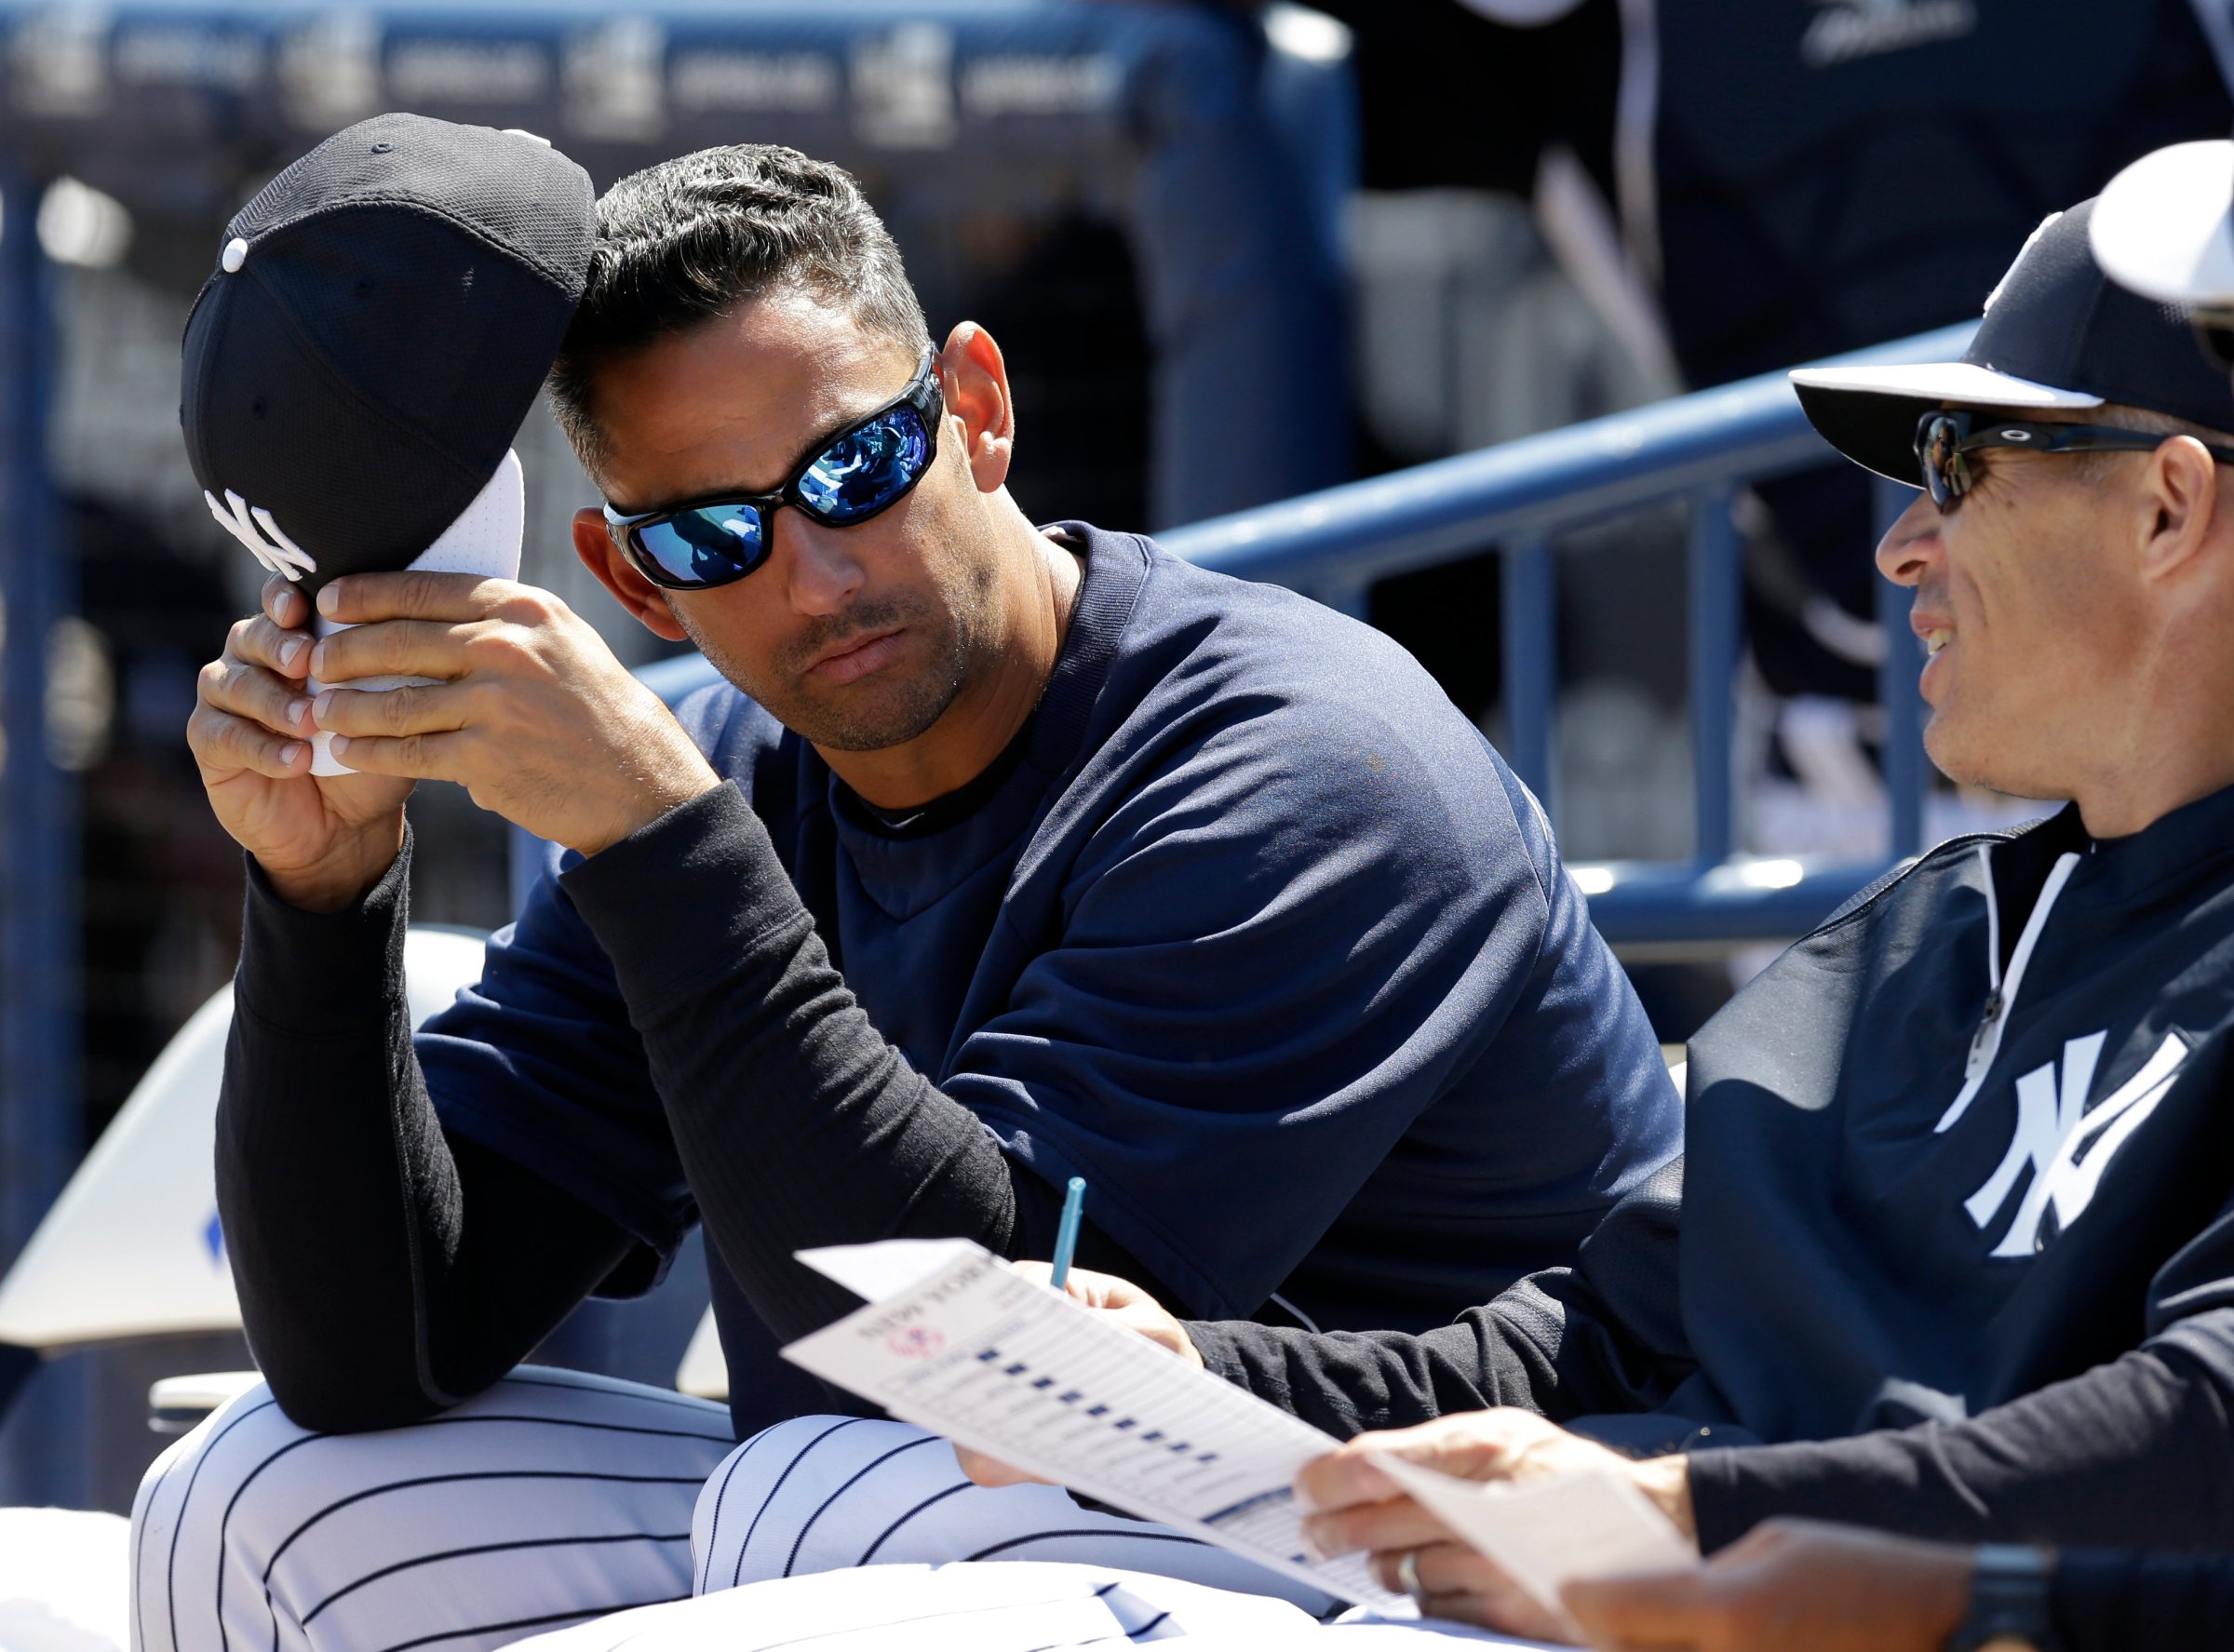 Former New York Yankees catcher Jorge Posada, left, in camp as a guest instructor, sits with New York Yankees manager Joe Girardi before a spring training baseball game against the Miami Marlins in Tampa